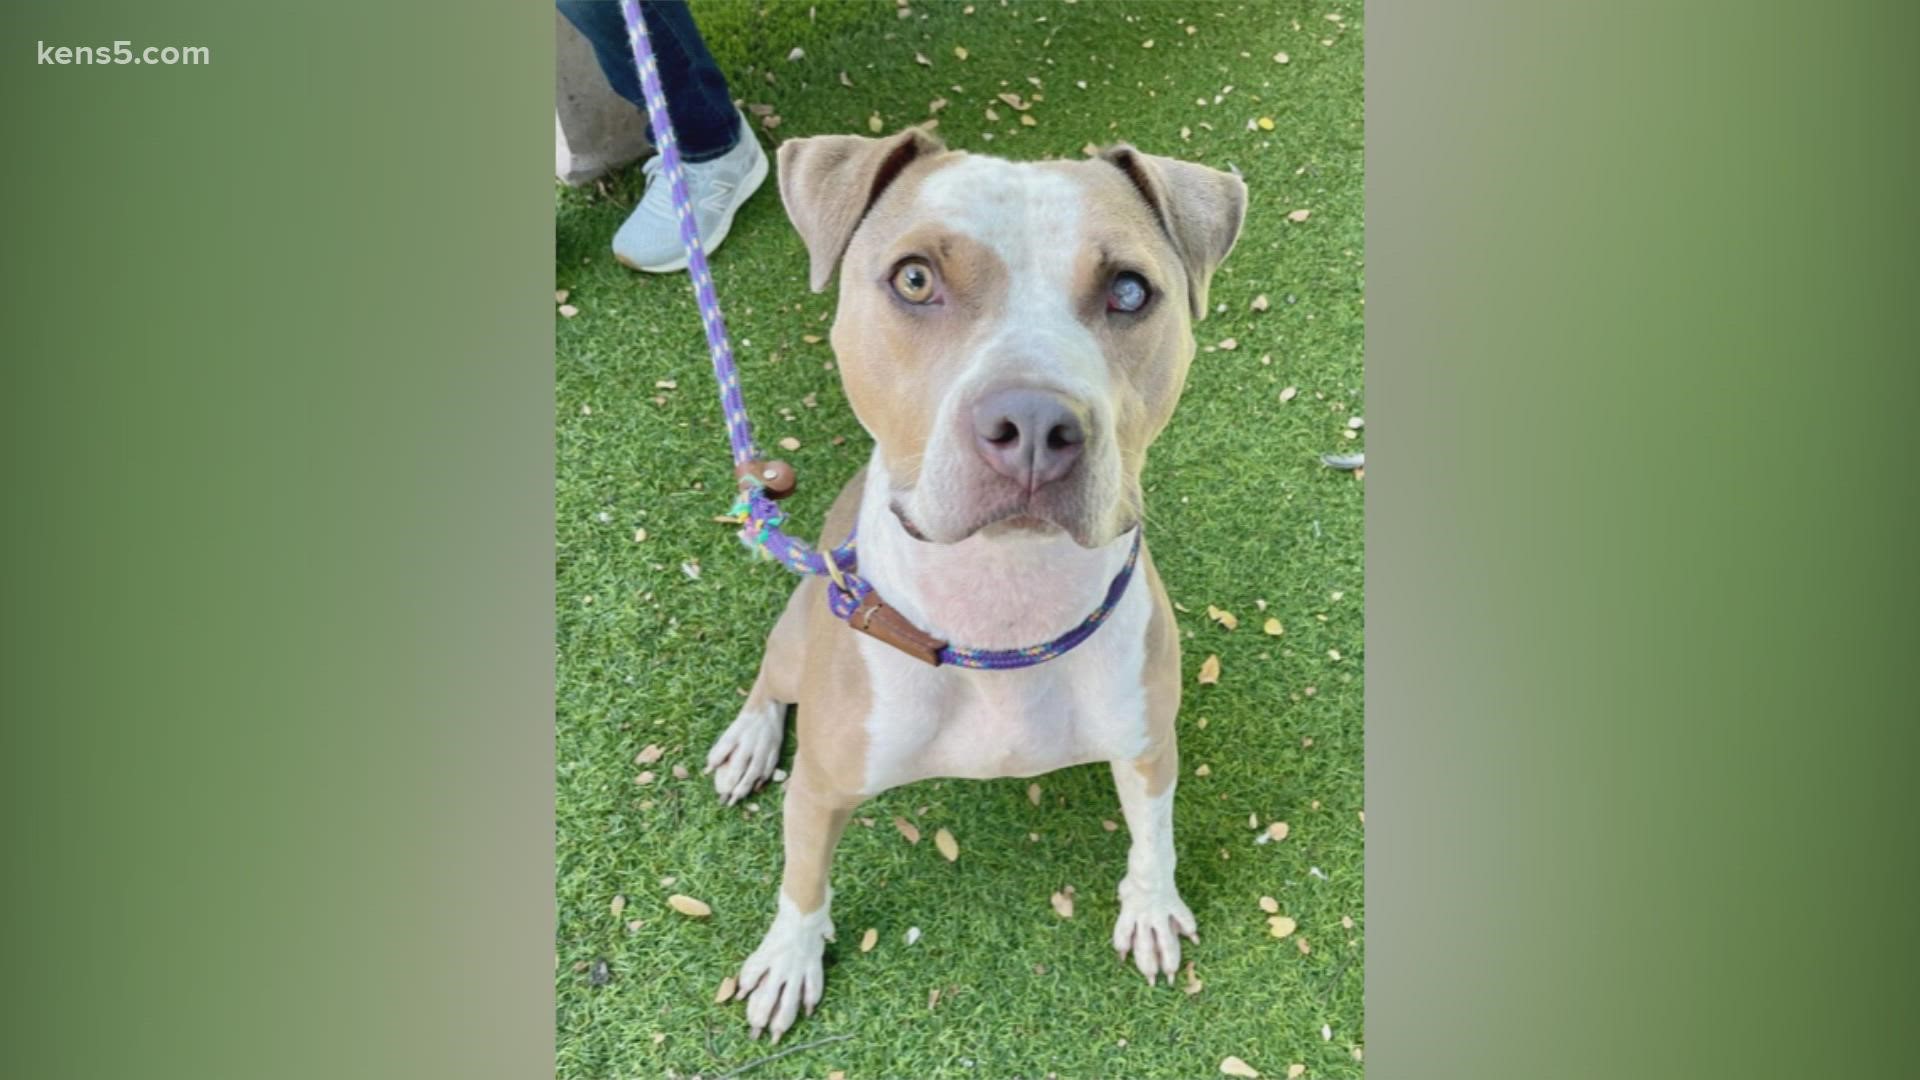 He's smart, trainable and would do well with an active family since he's very playful, the San Antonio Humane Society says.